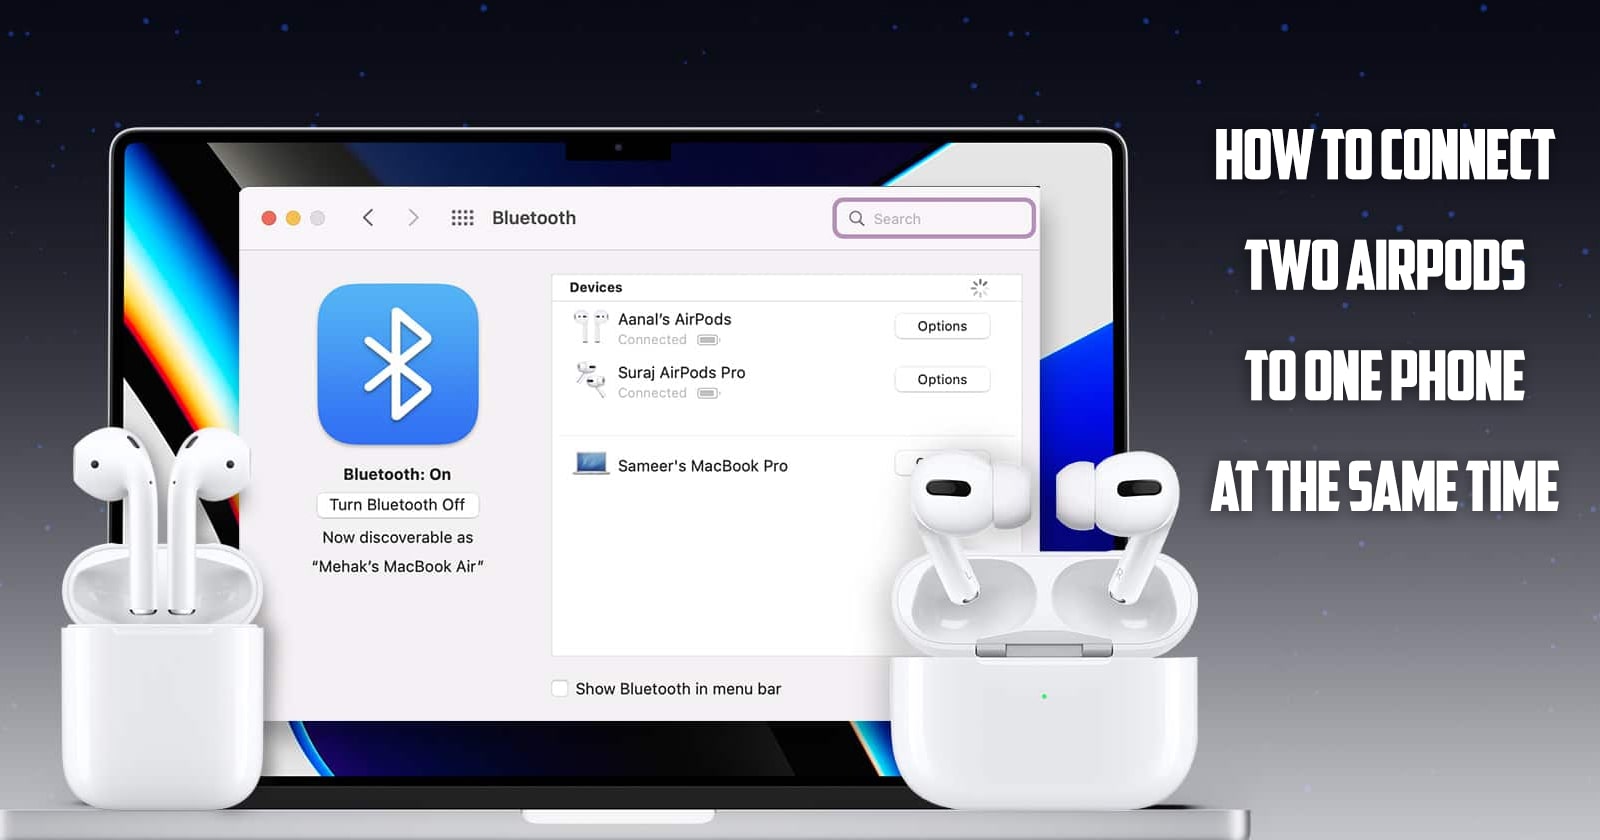 How to Connect Two AirPods to One Phone at the Same Time?